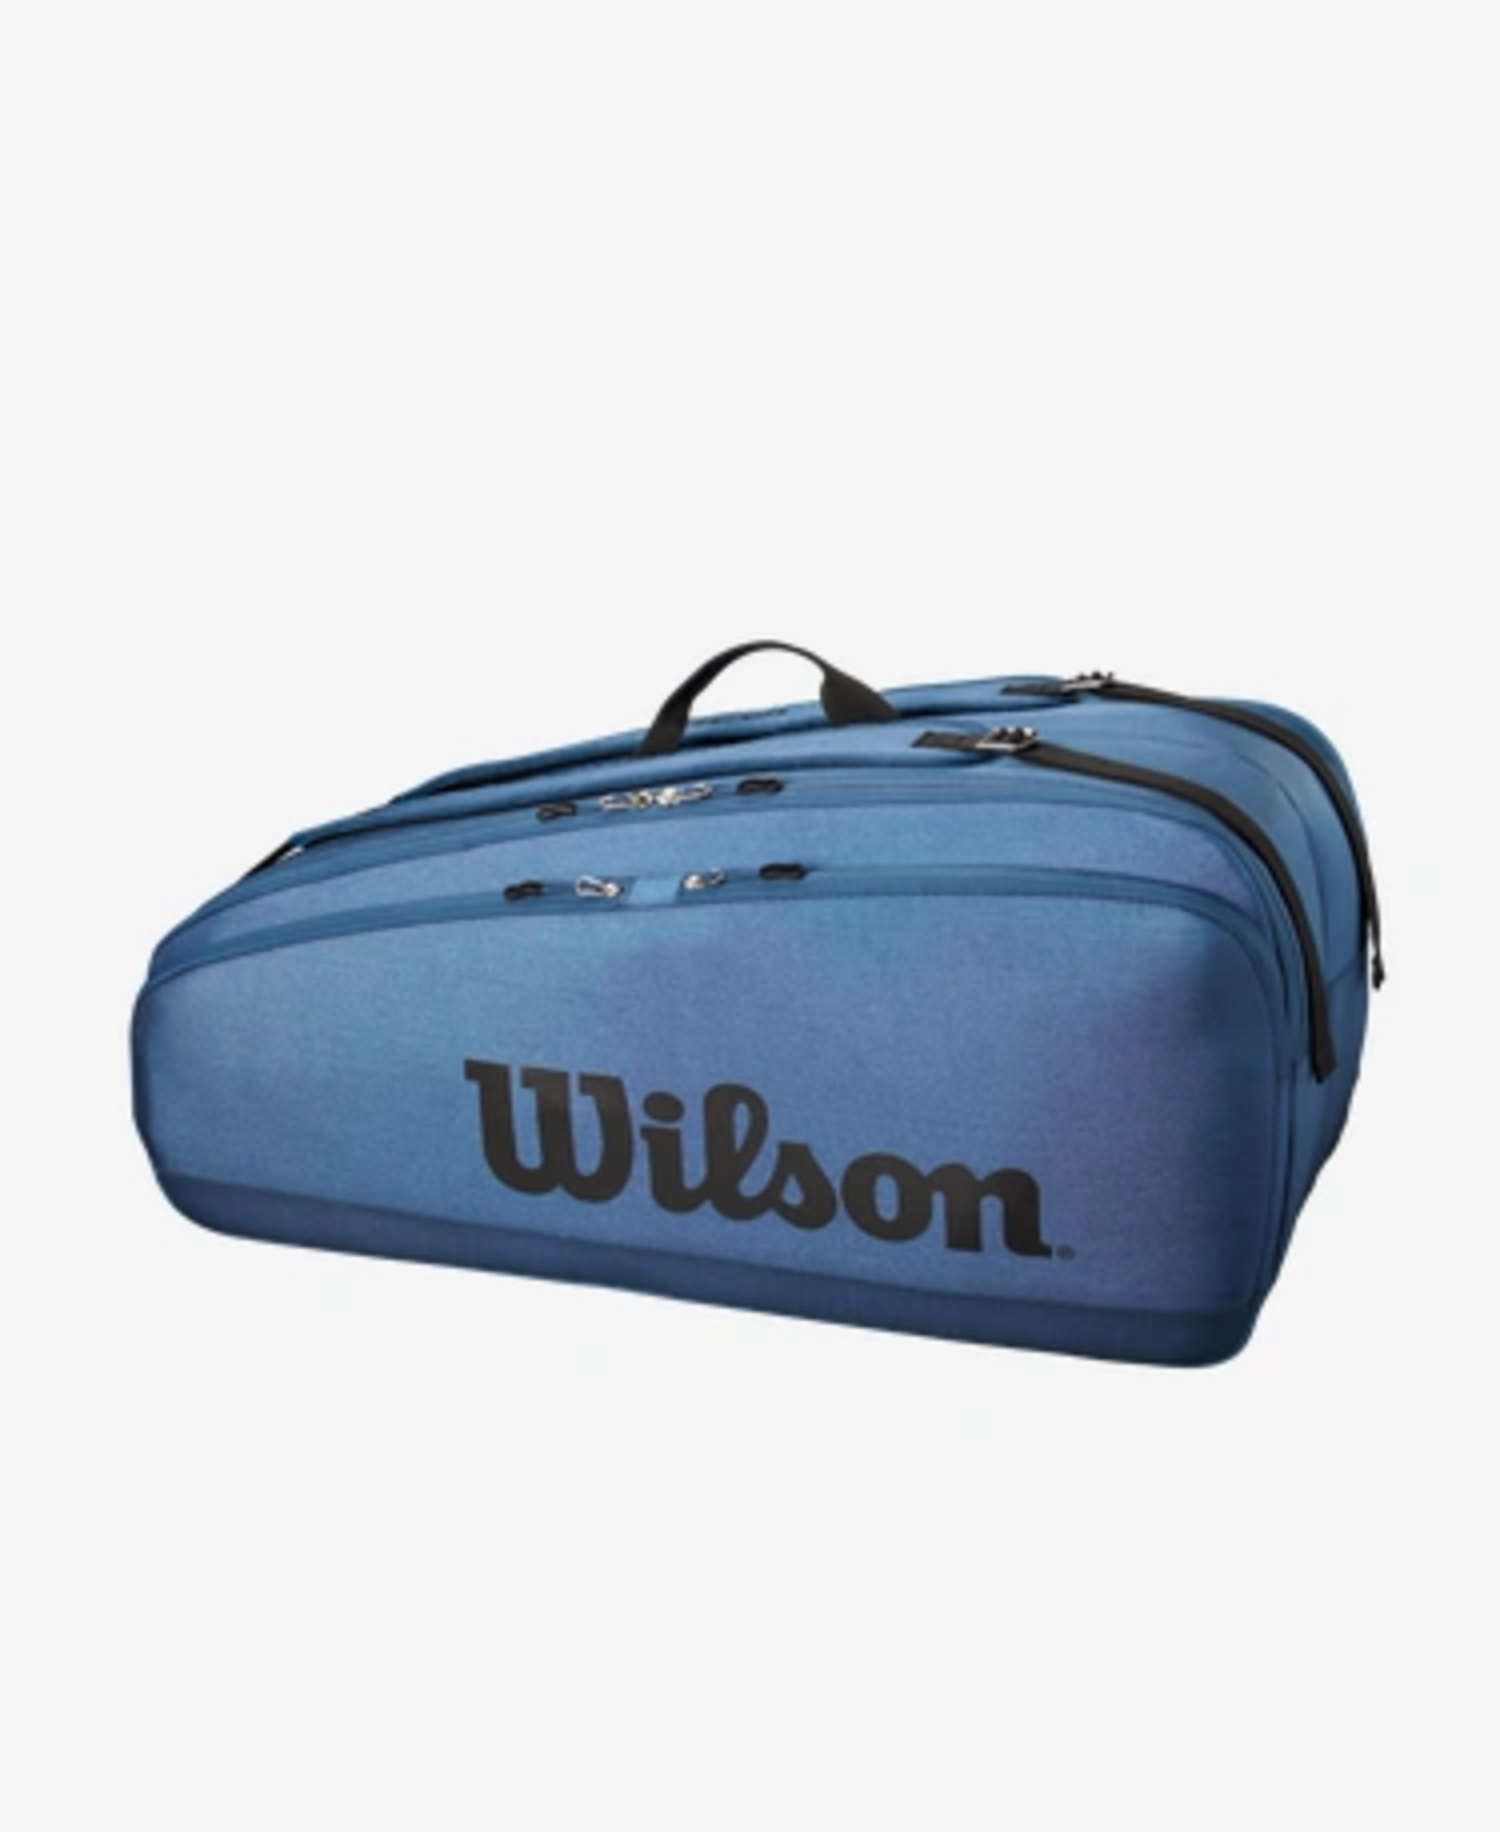 Wilson Authentic 6 Ball Travel Bag | Dick's Sporting Goods